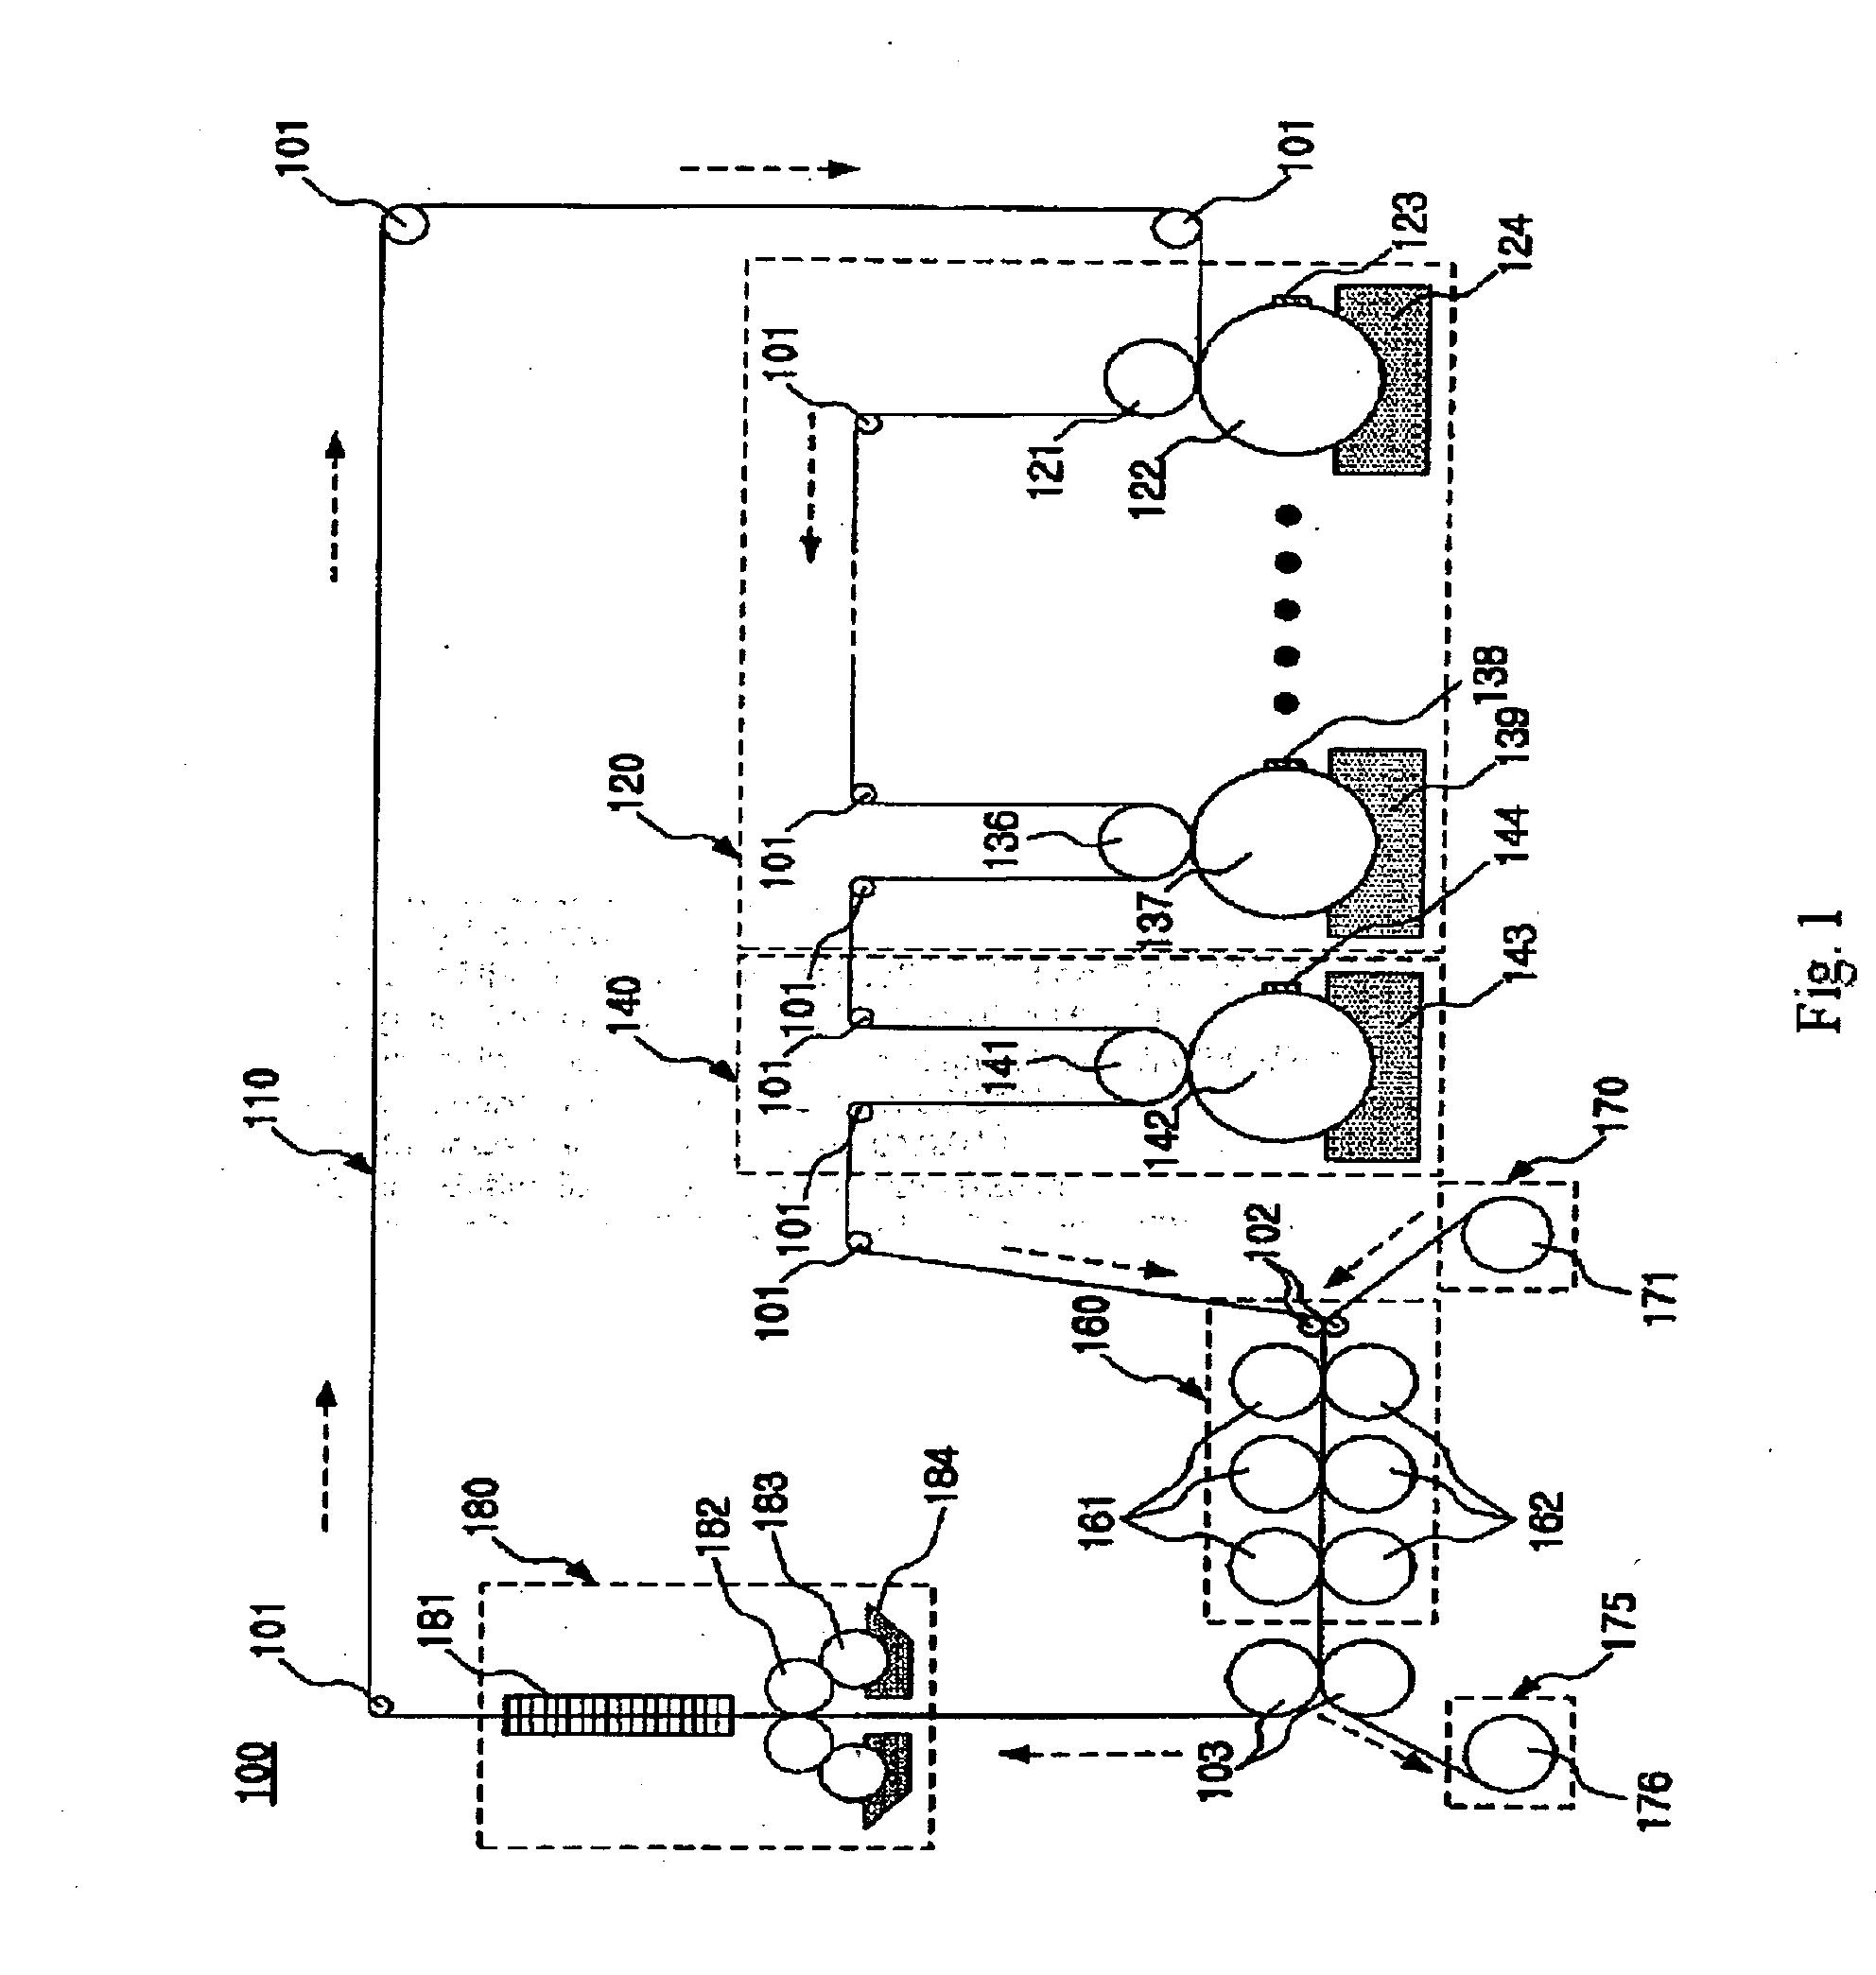 Method and apparatus for transfer printing, and printed articles manufactured by same